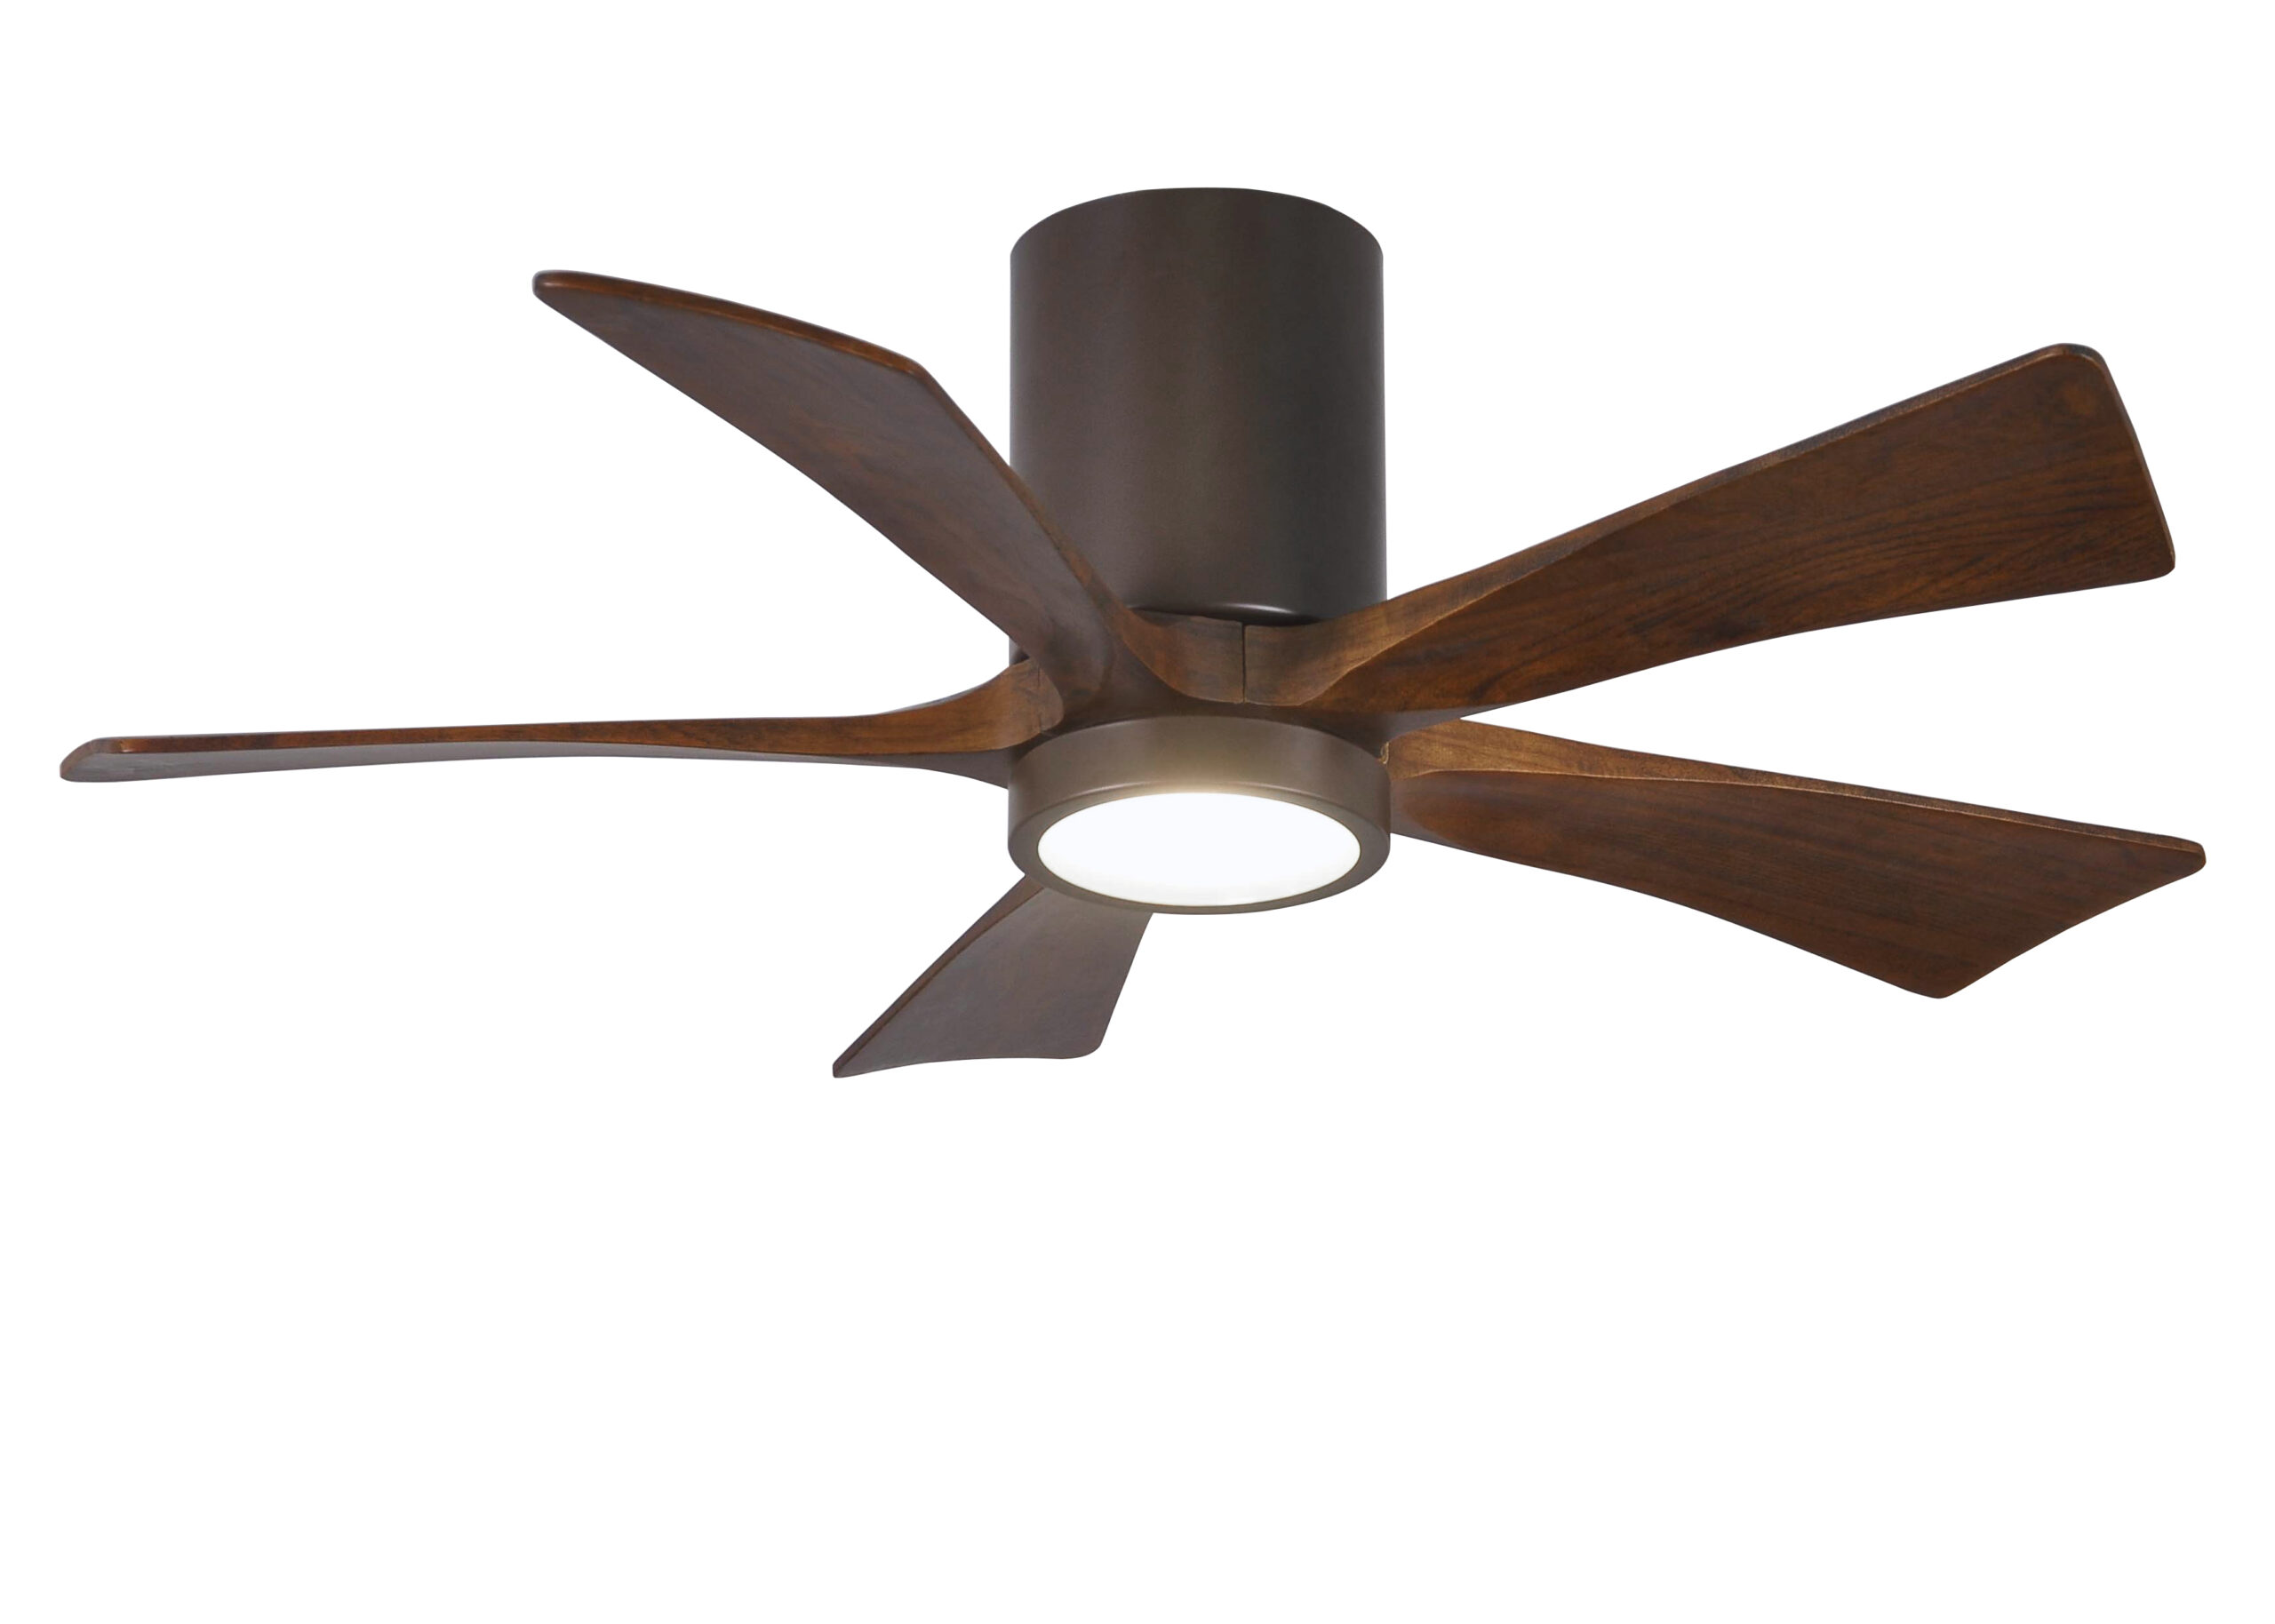 Irene-5HLK Ceiling Fan in Textured Bronze Finish with 42